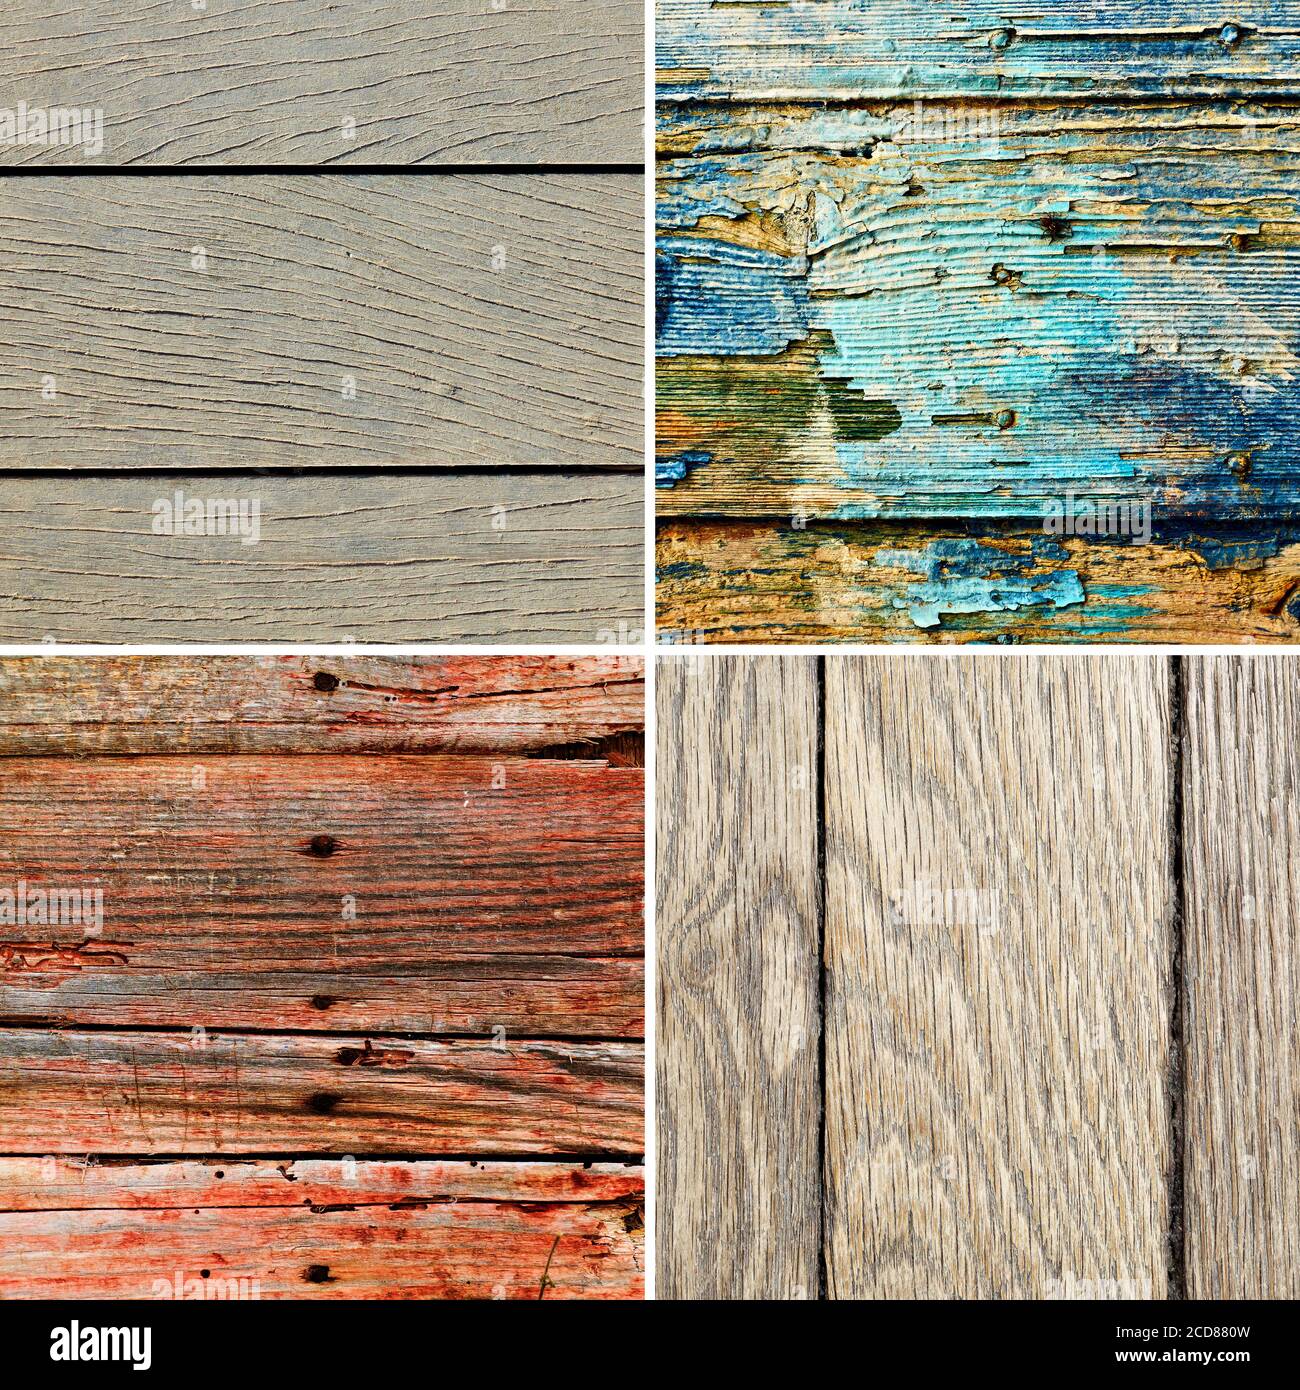 Set of old wooden textures. Wood backgrounds Stock Photo